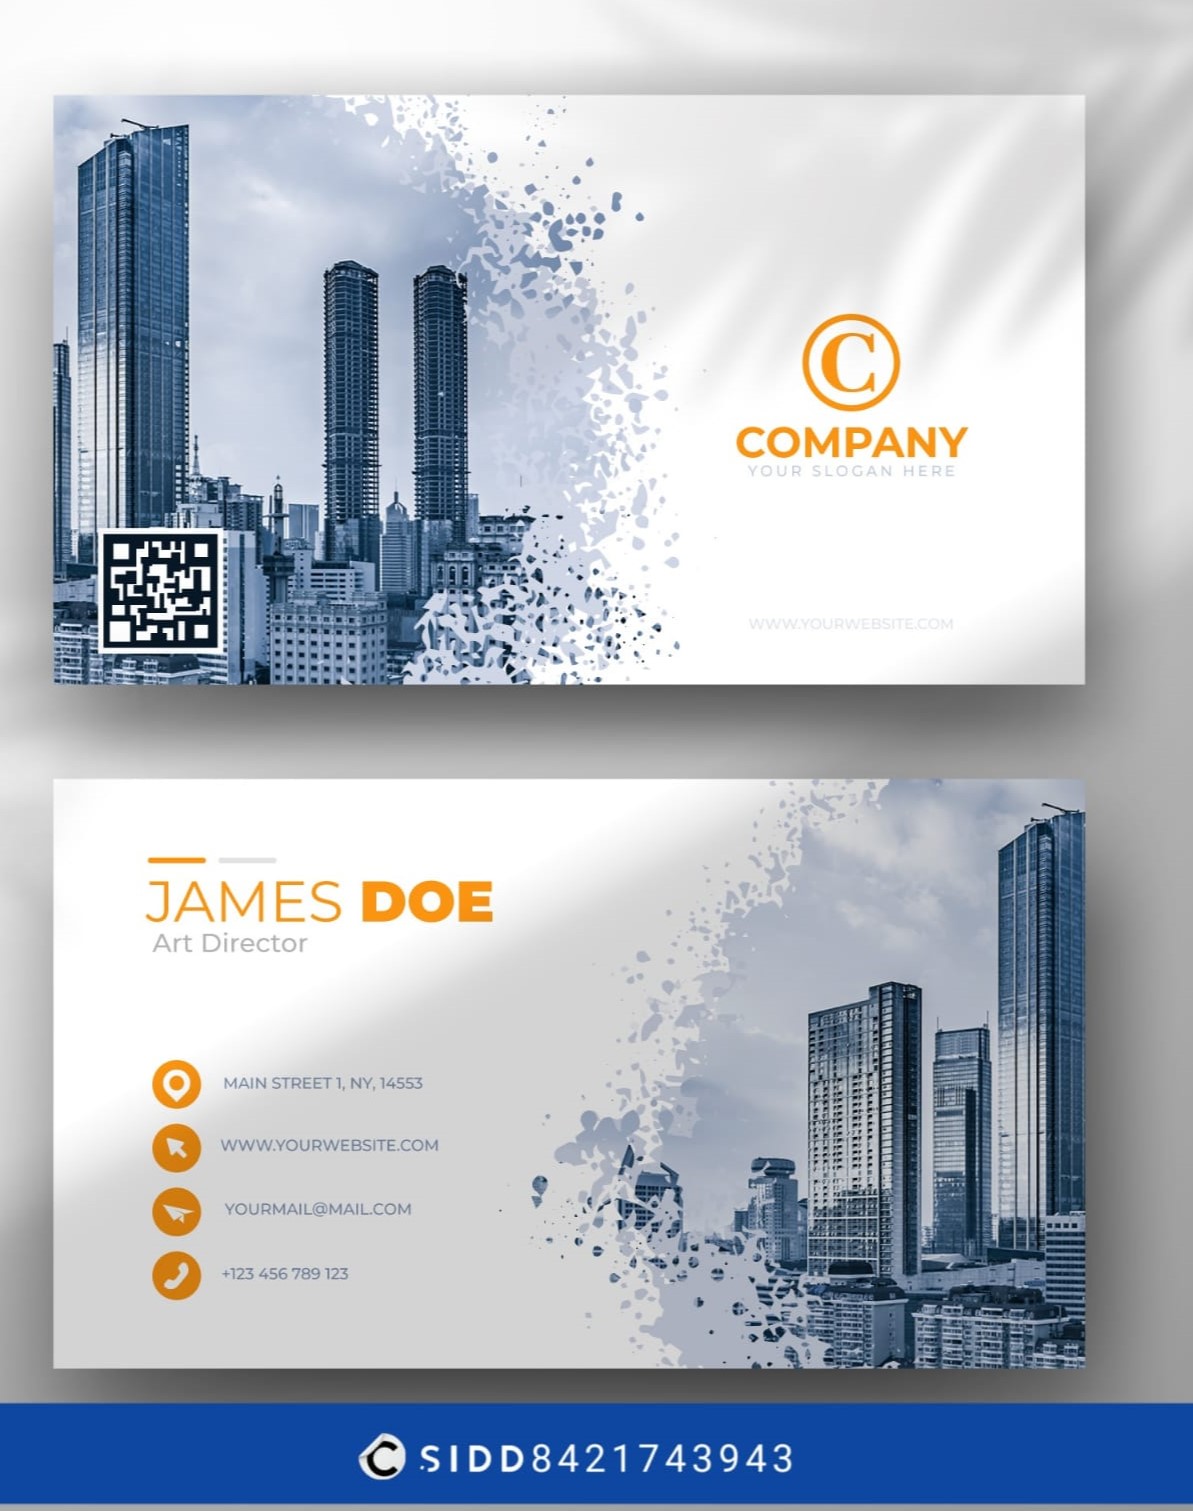 Business card with a cityscape in the background.